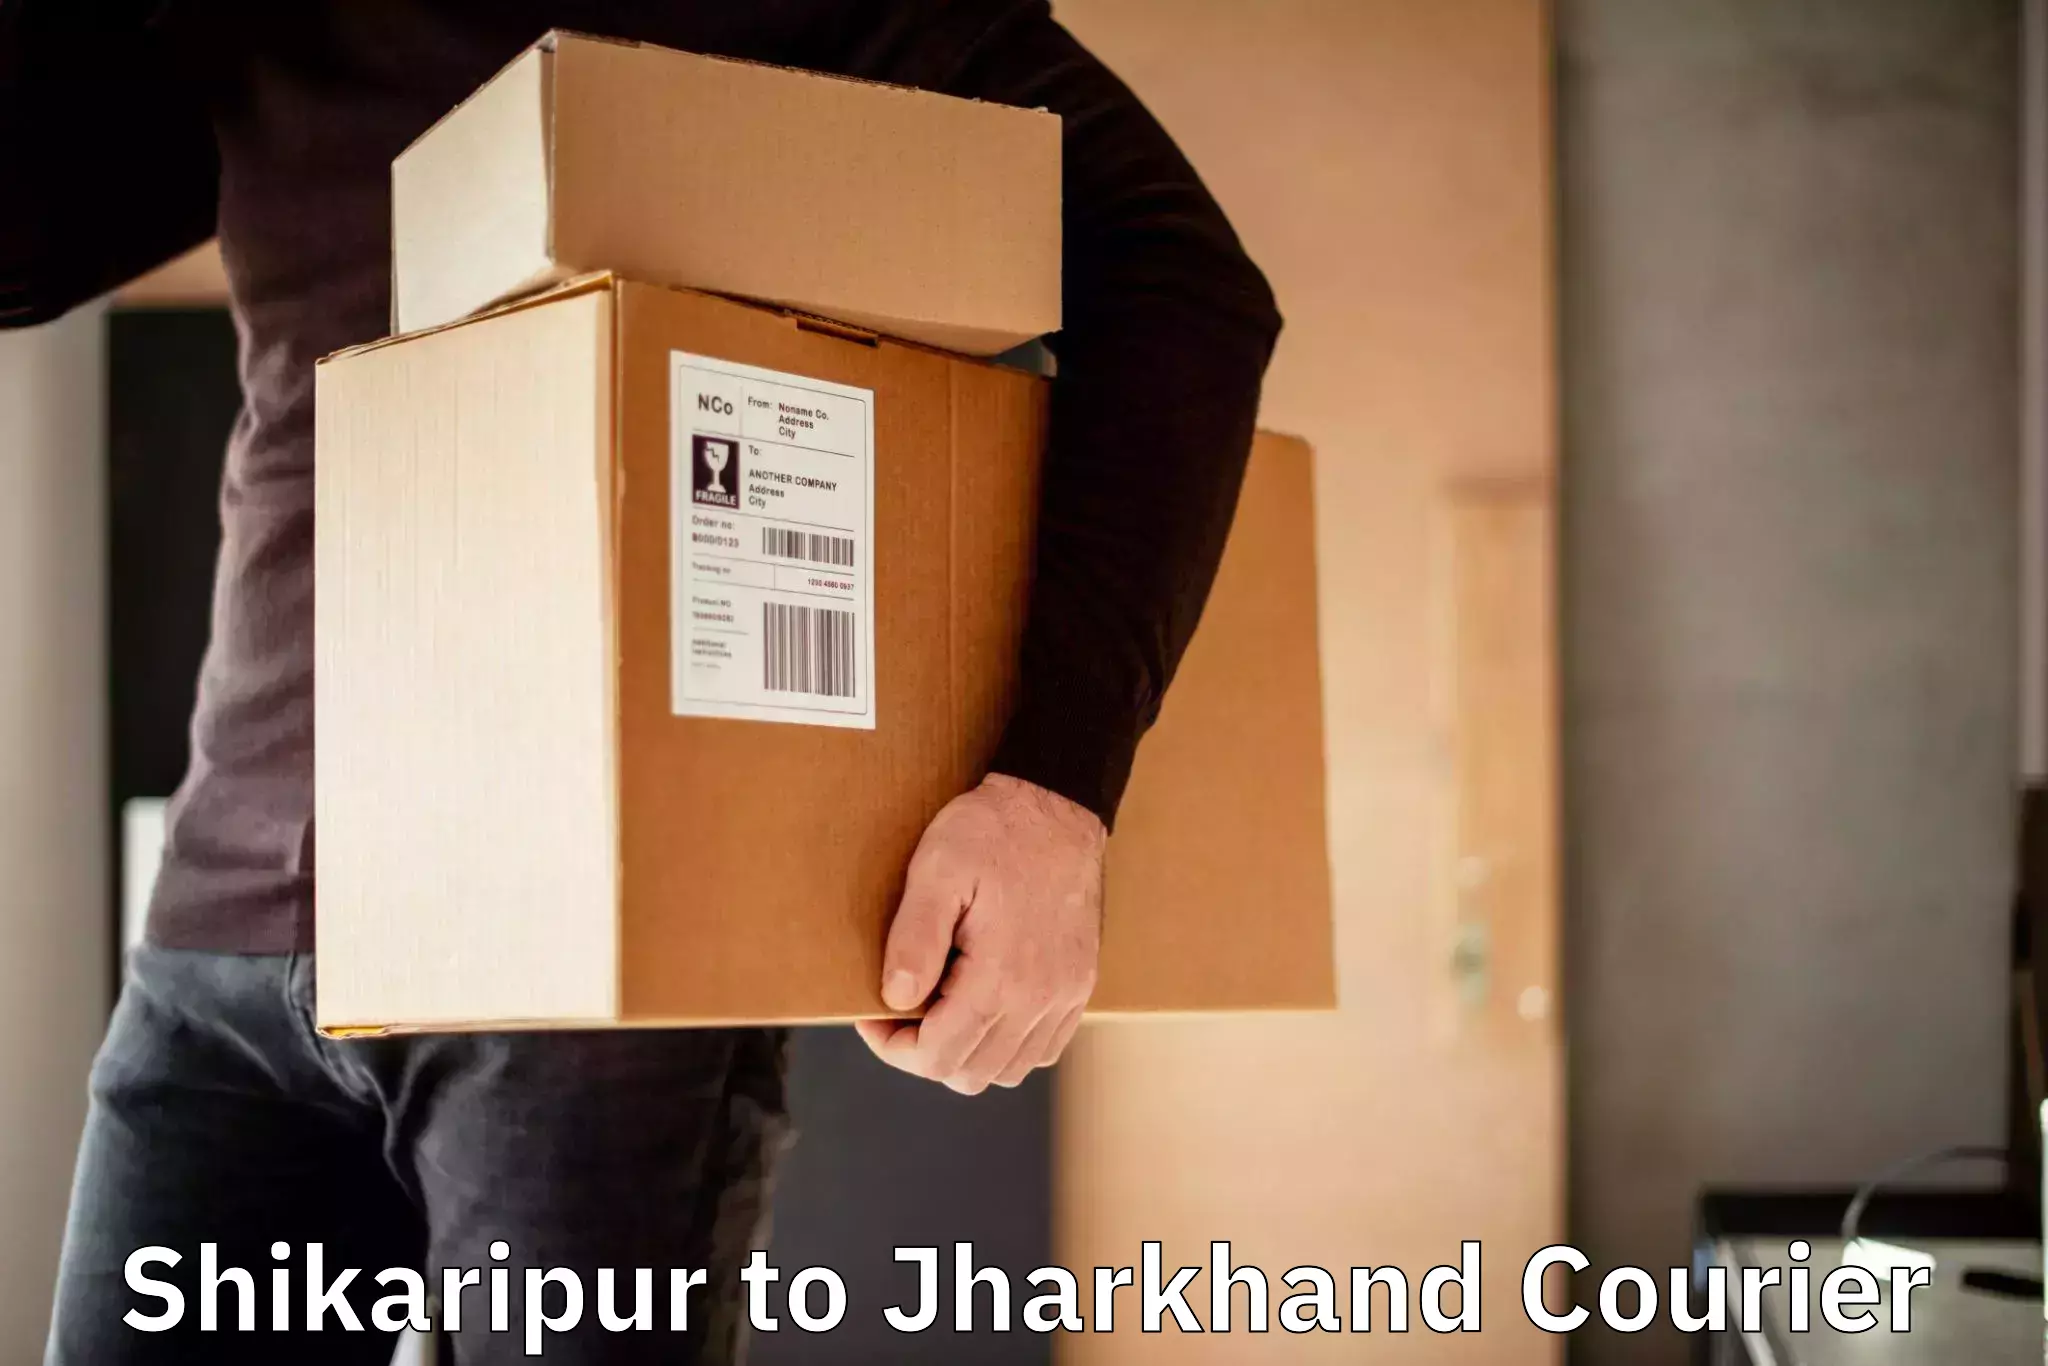 Courier service booking Shikaripur to Godabar Chatra